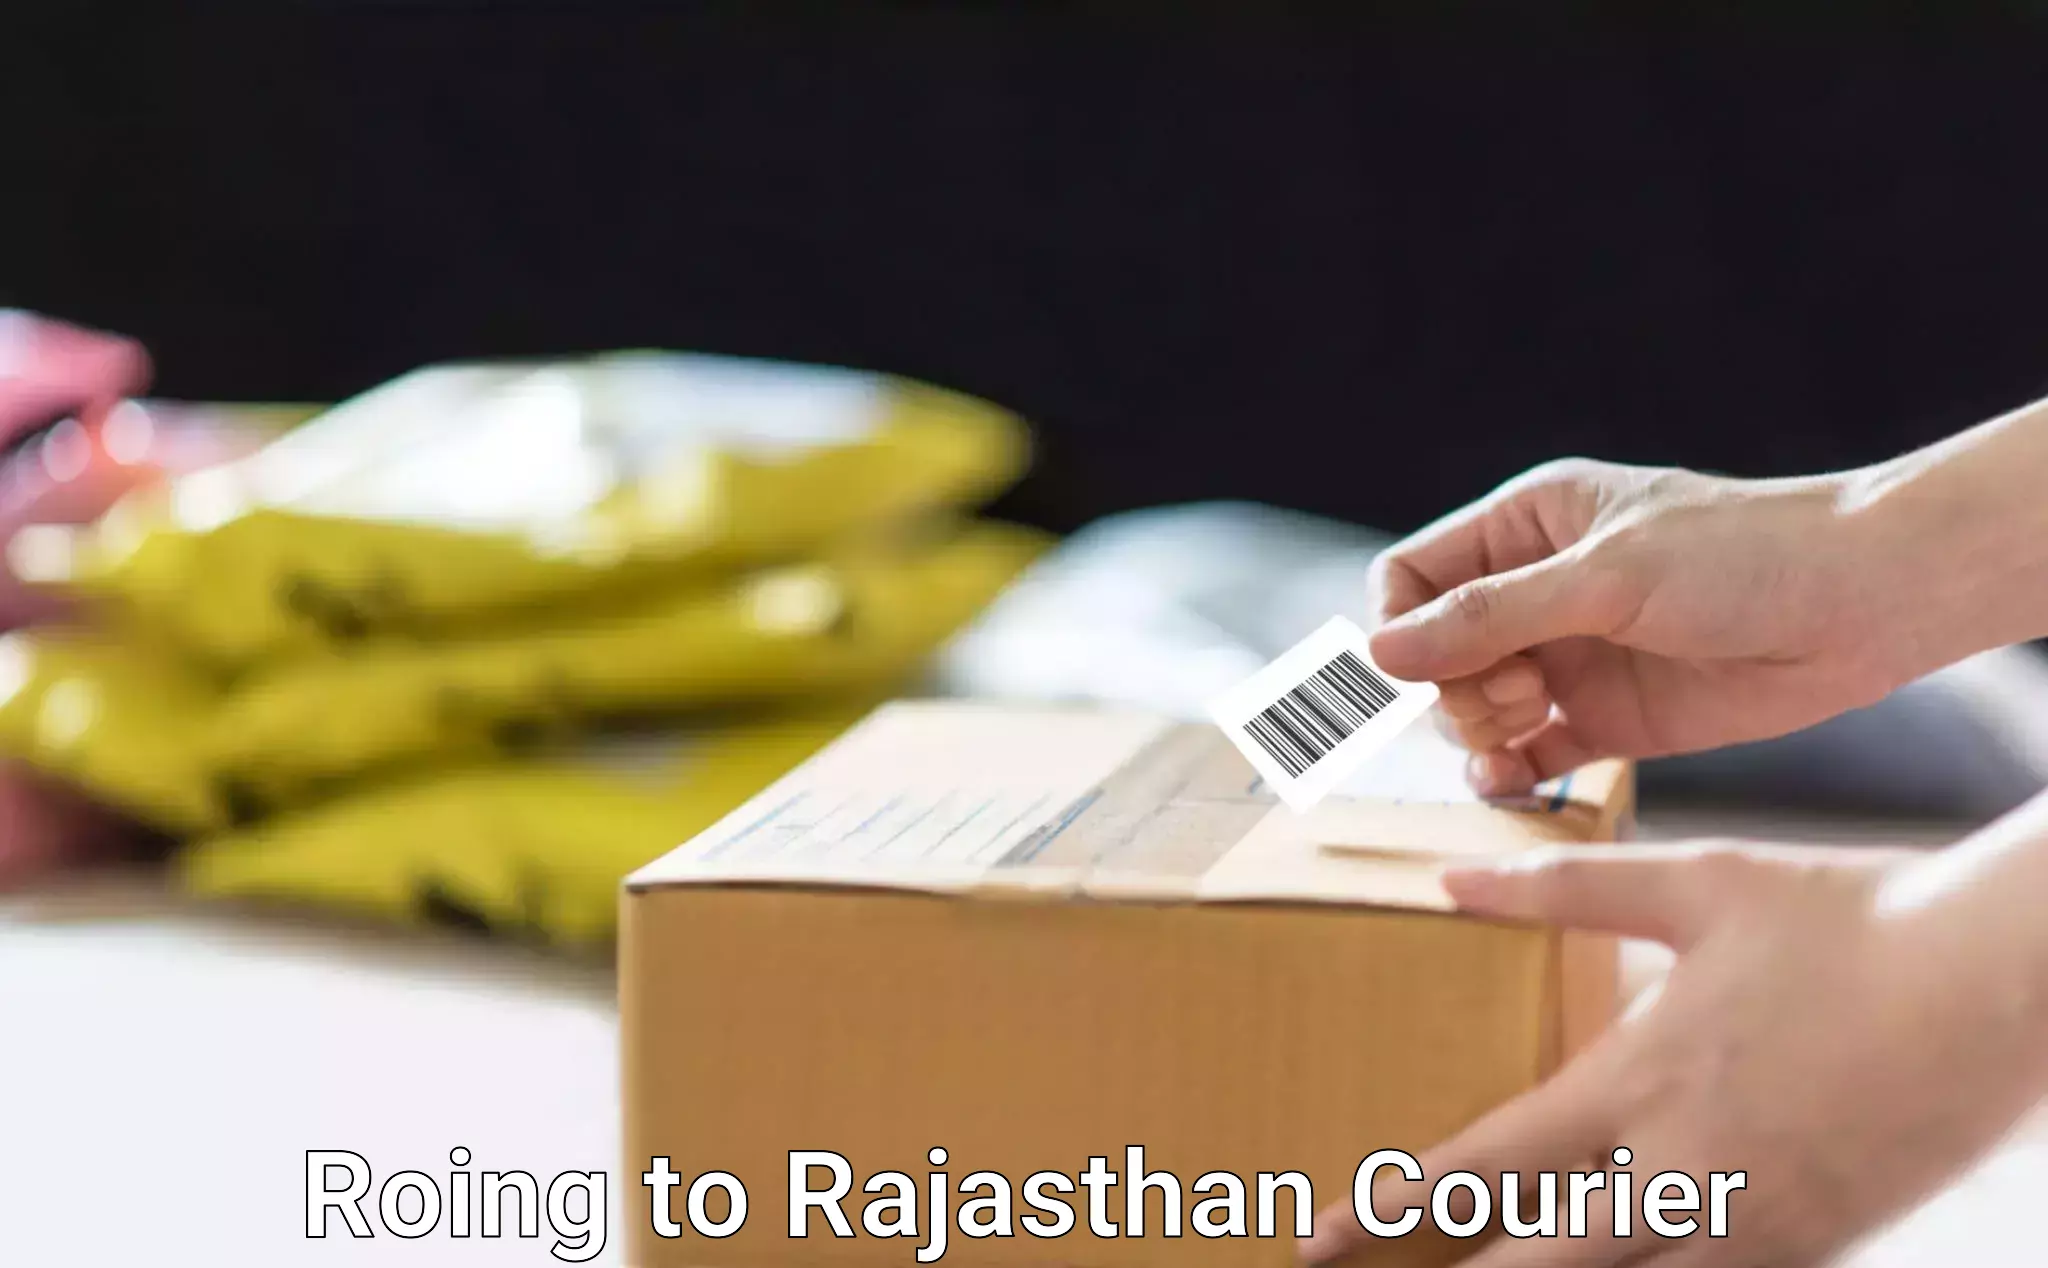 Parcel handling and care Roing to Rajasthan